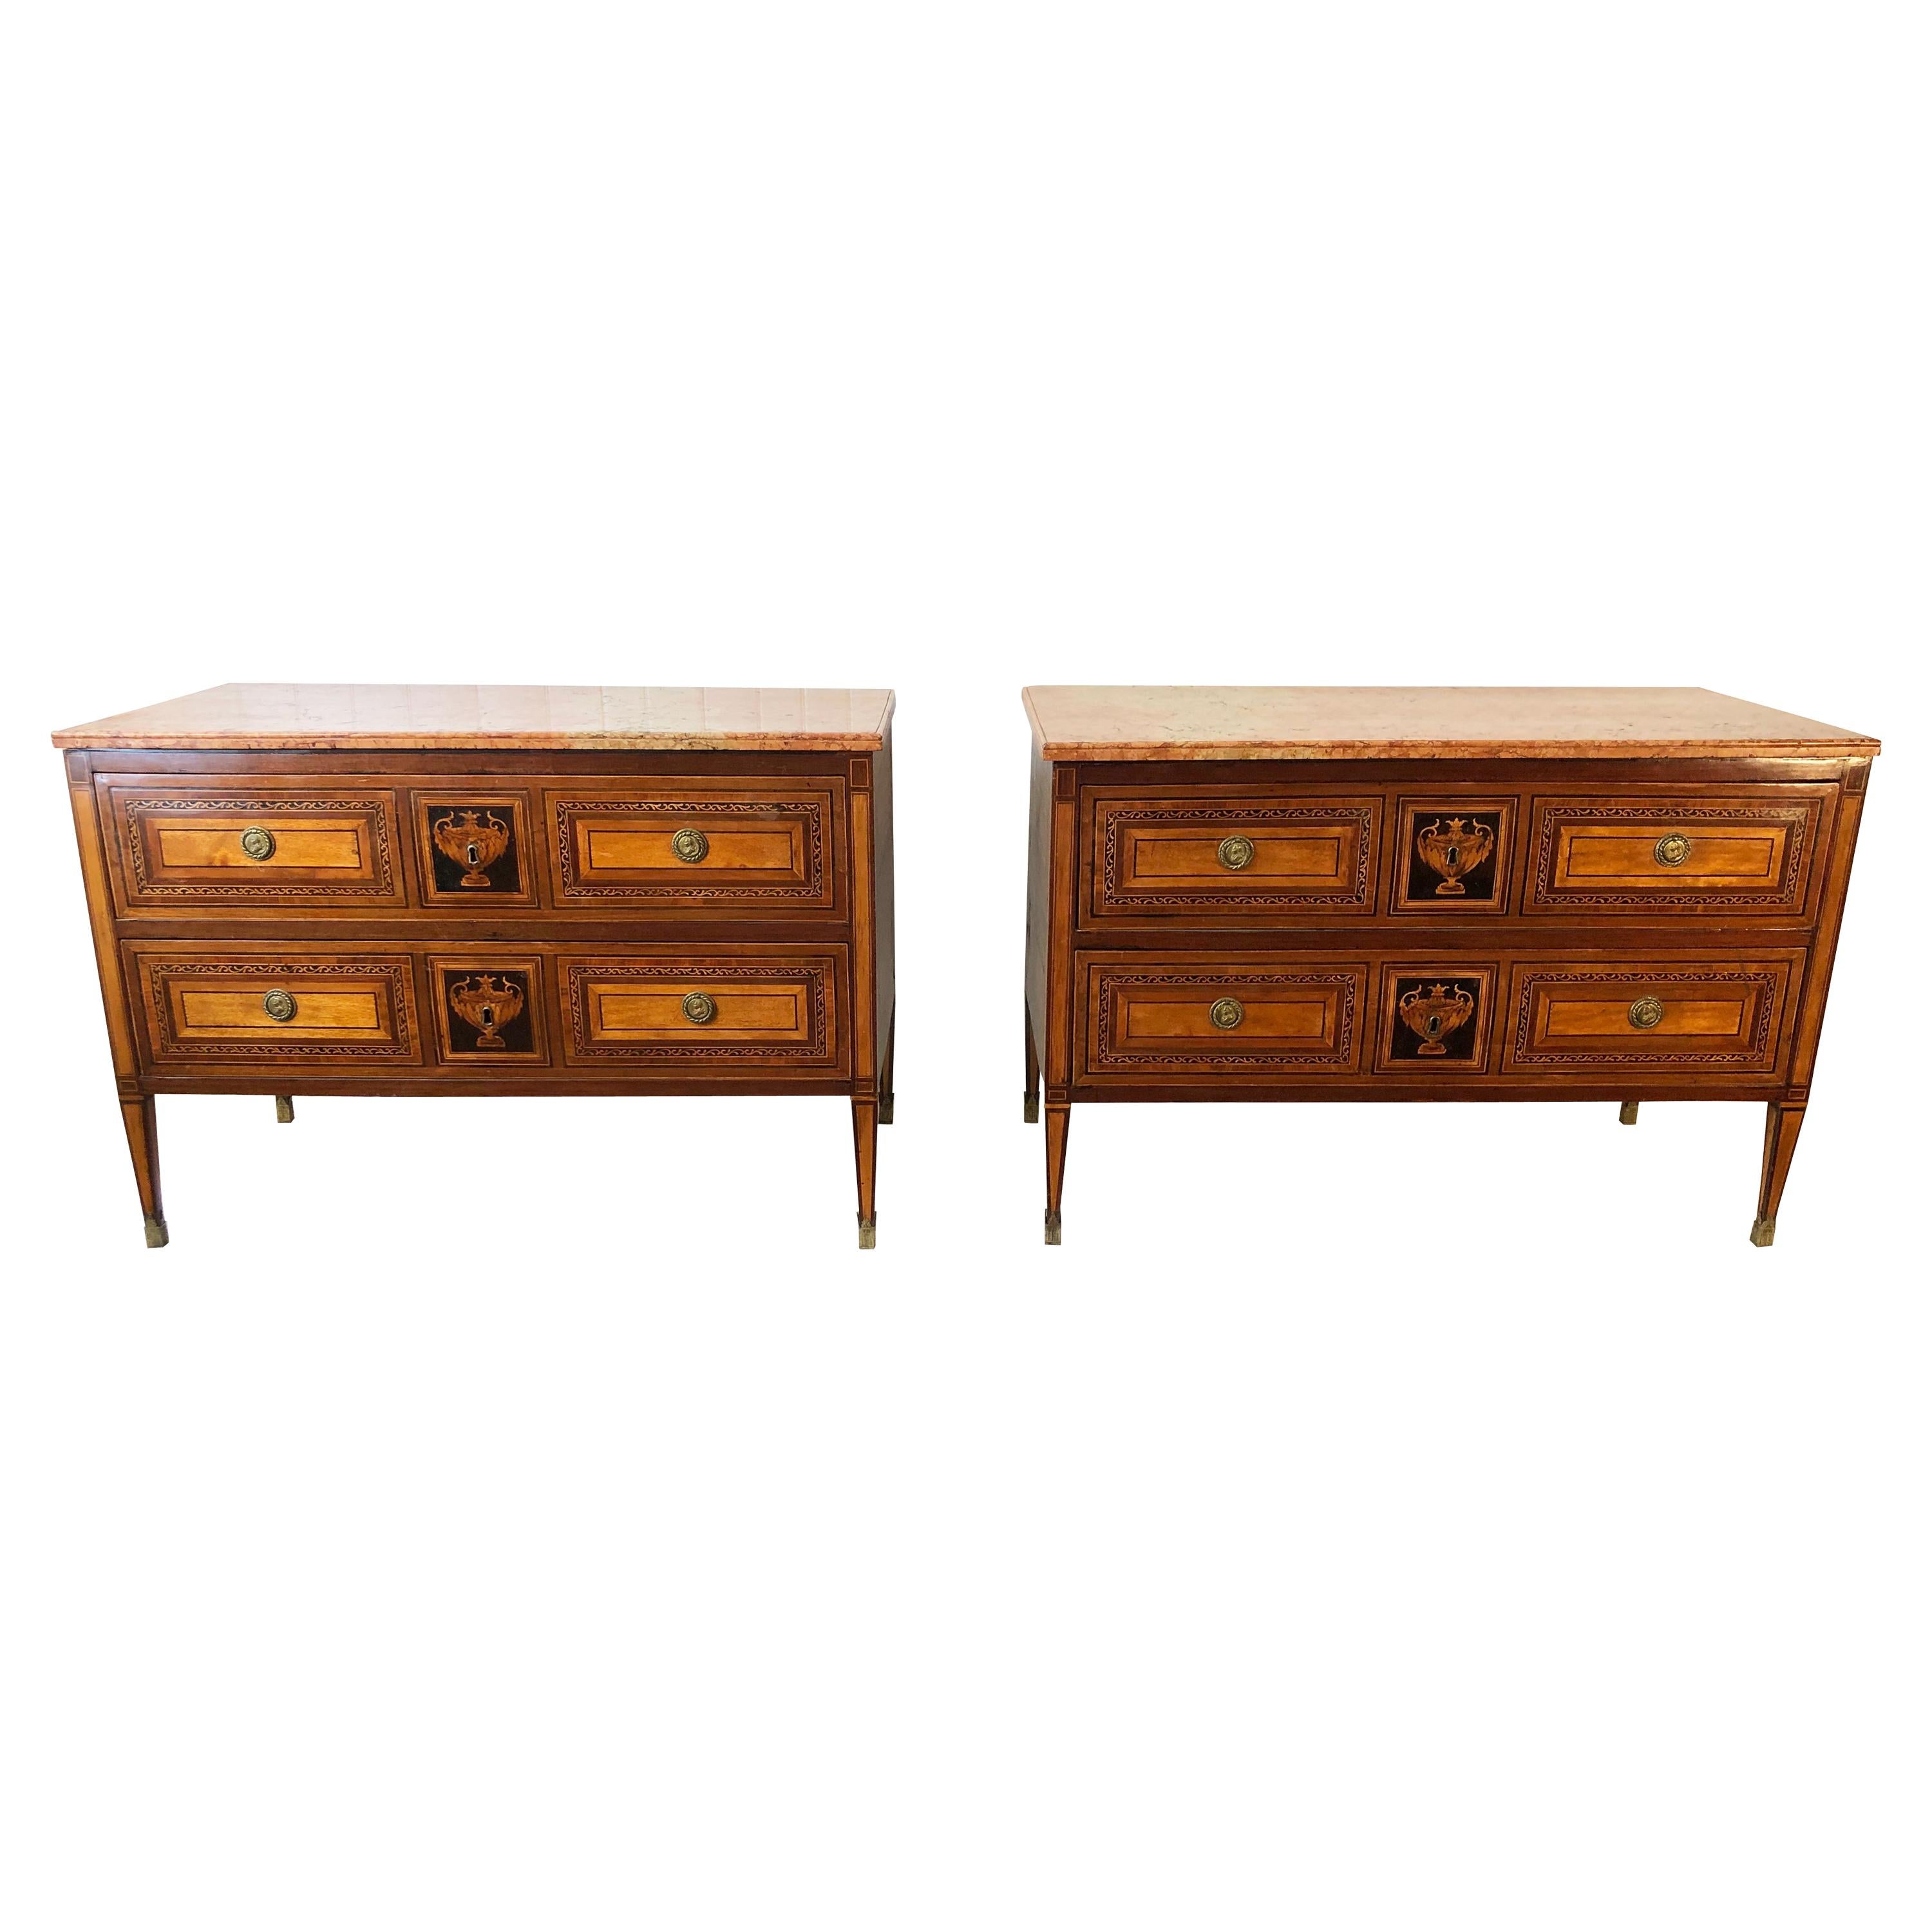 18th Century Pair of Italian Neoclassical Commodes with Bookmatched Marble Tops